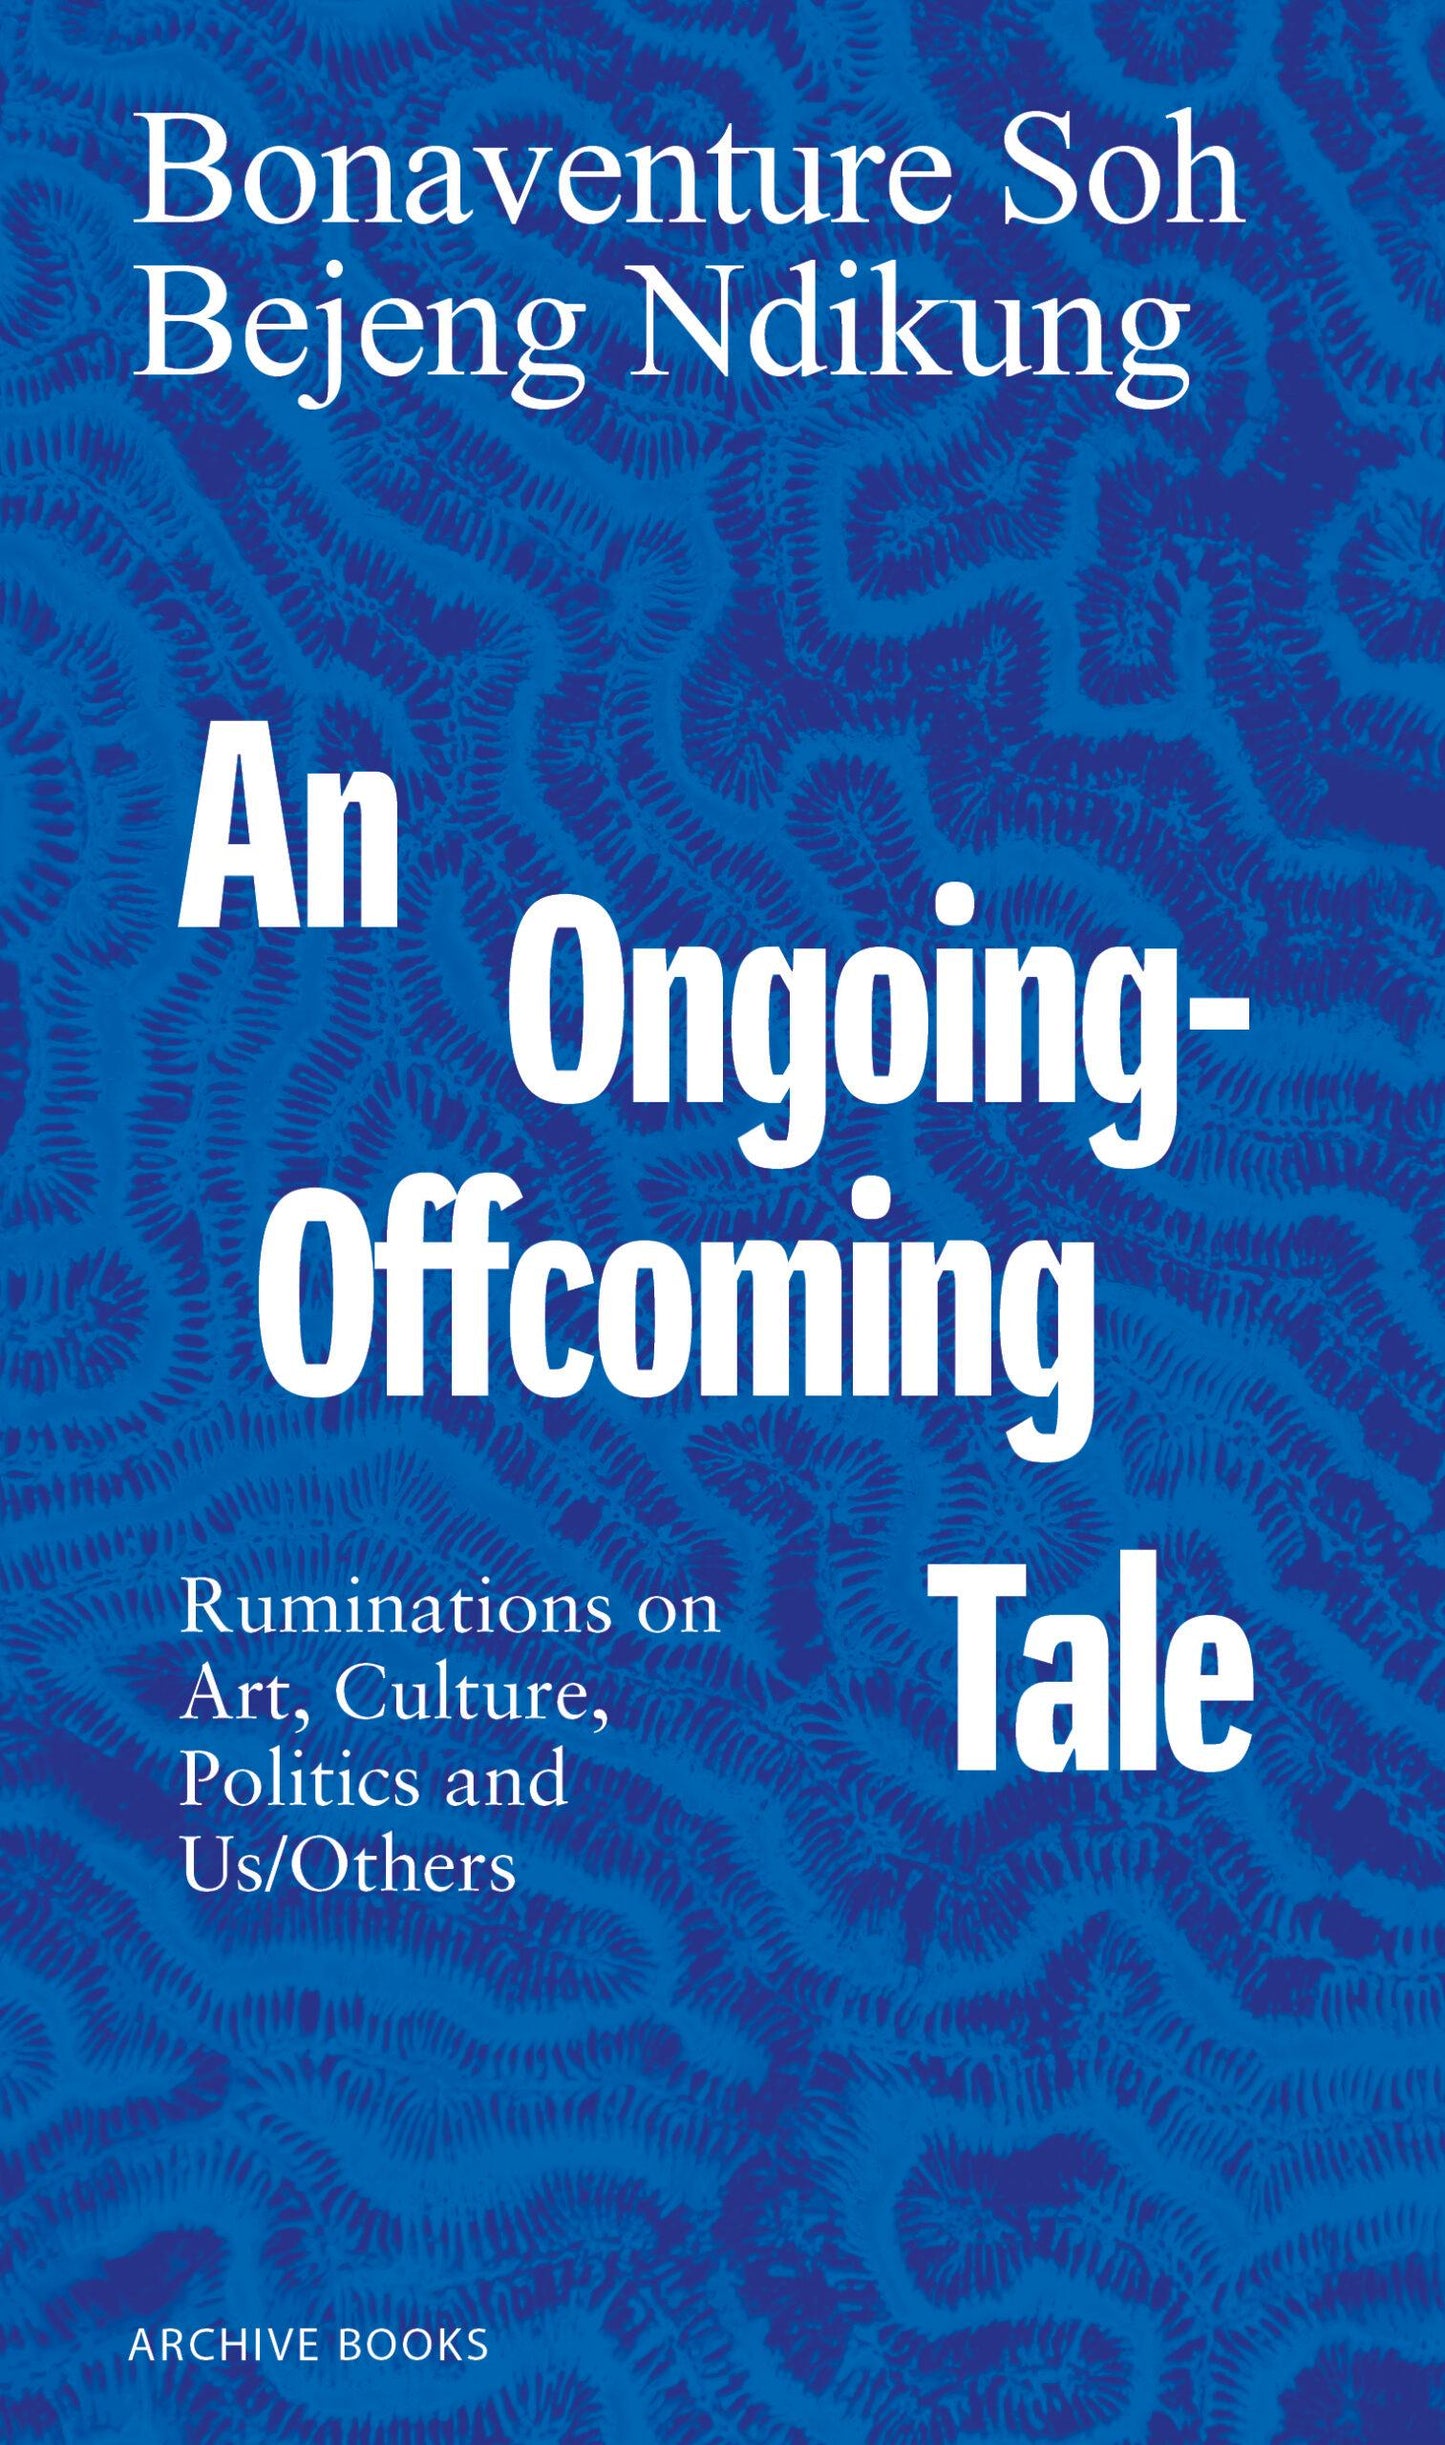 An Ongoing-Offcoming Tale: Ruminations on Art, Culture, Politics and Us/Others - Bonaventure Soh Bejeng Ndikung